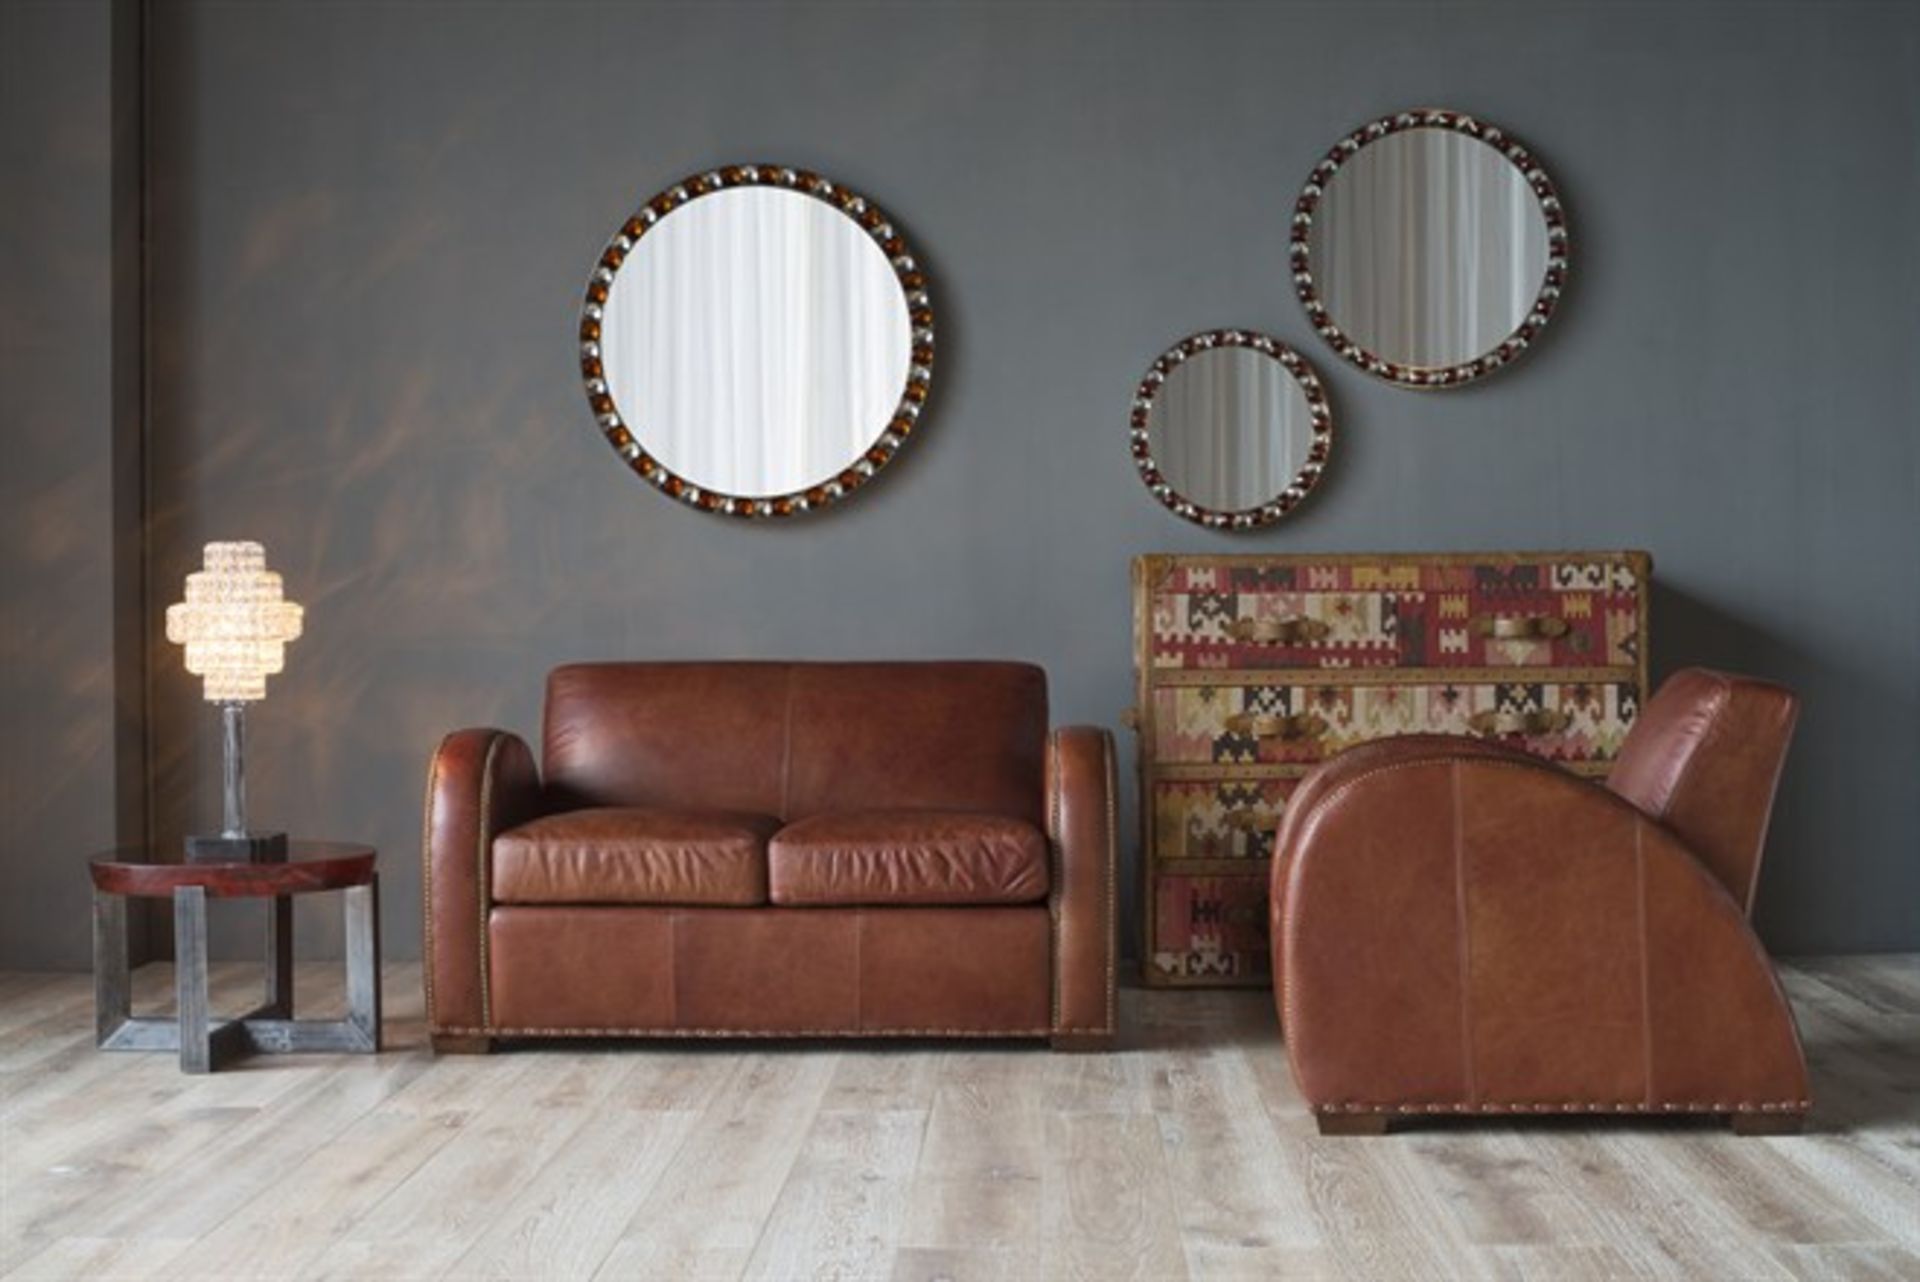 French Deco Sofa 2 Seater Ride Mocca Leather Part Of The Brand’s French Deco Collection, Which